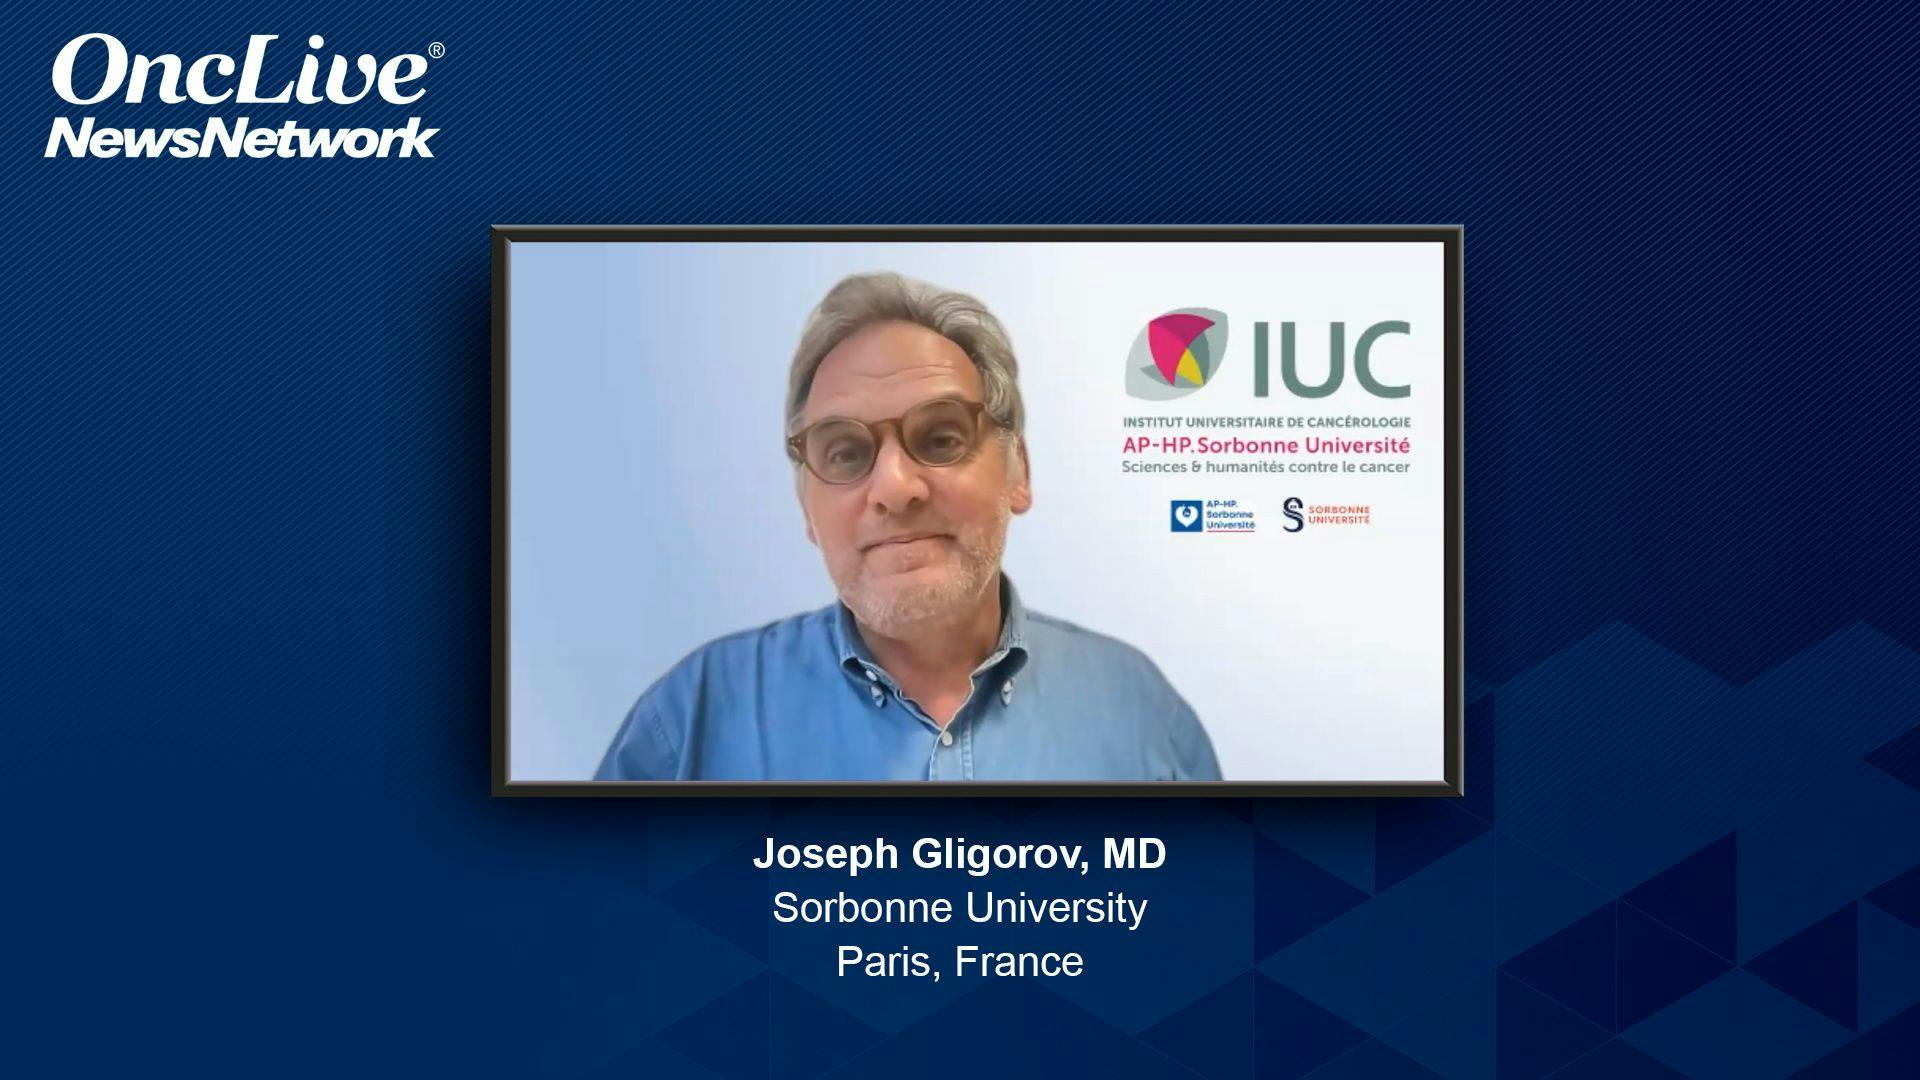 Treatment Approaches for Patients With HER2+ mBC and Brain Metastases